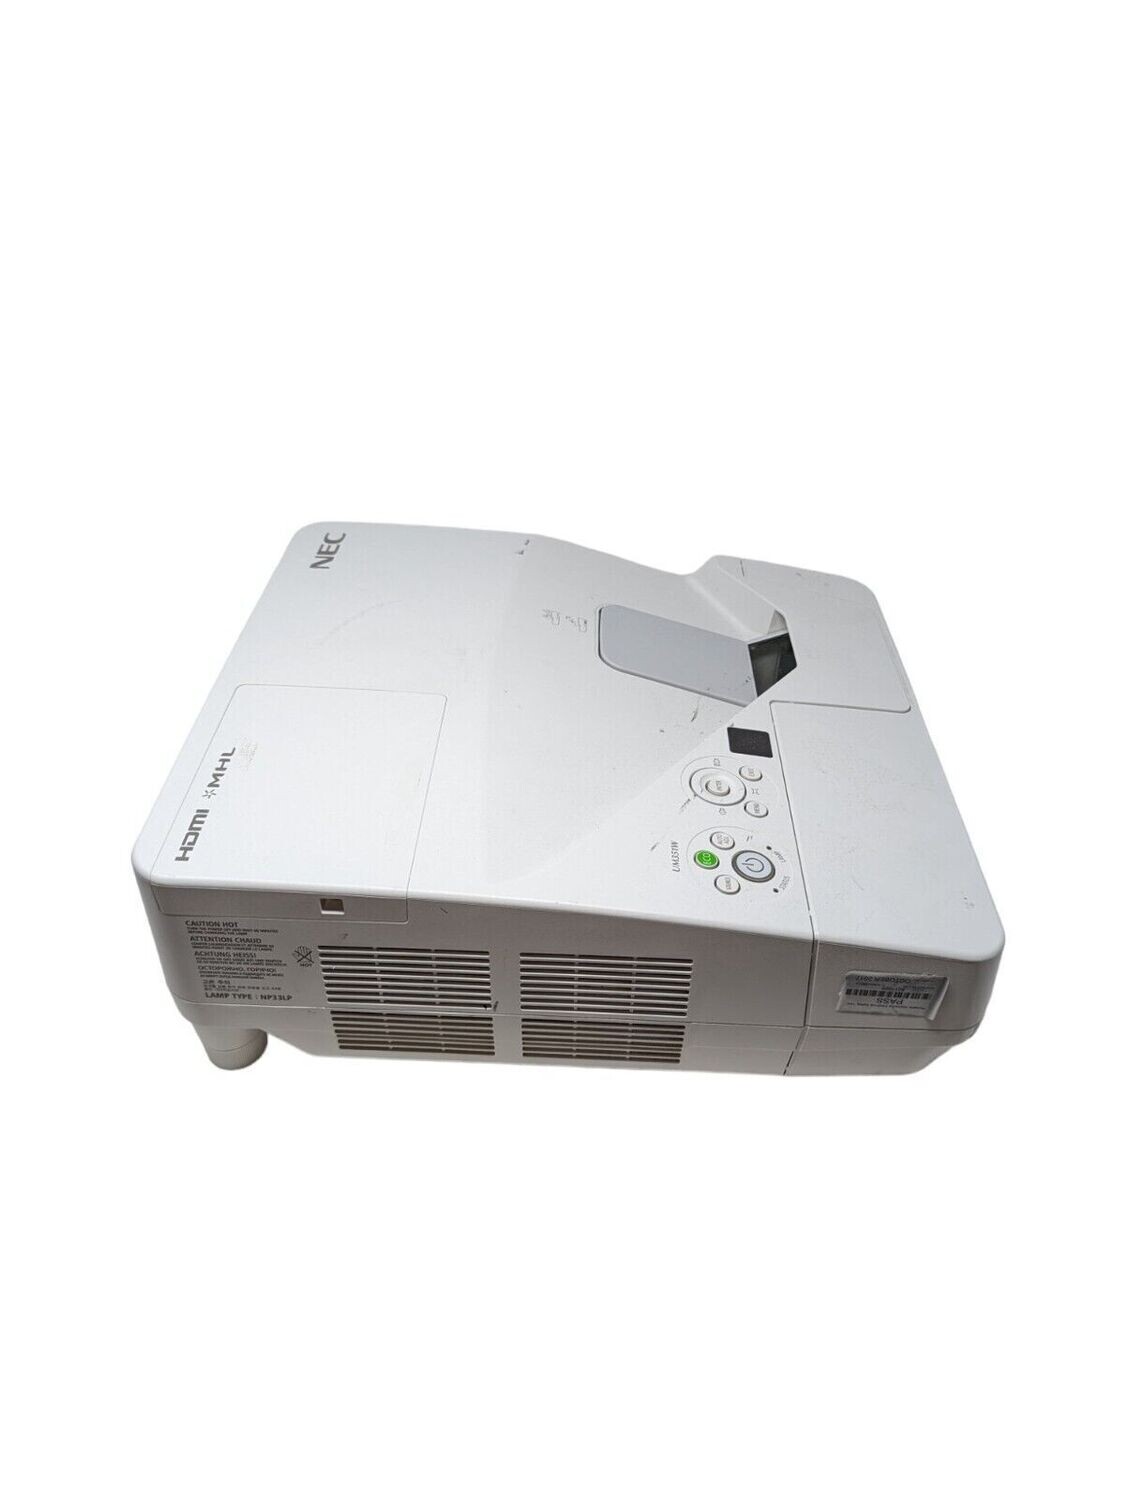 NEC NP-UM351W Ultra Short Throw Projector 1279 Lamp Hours